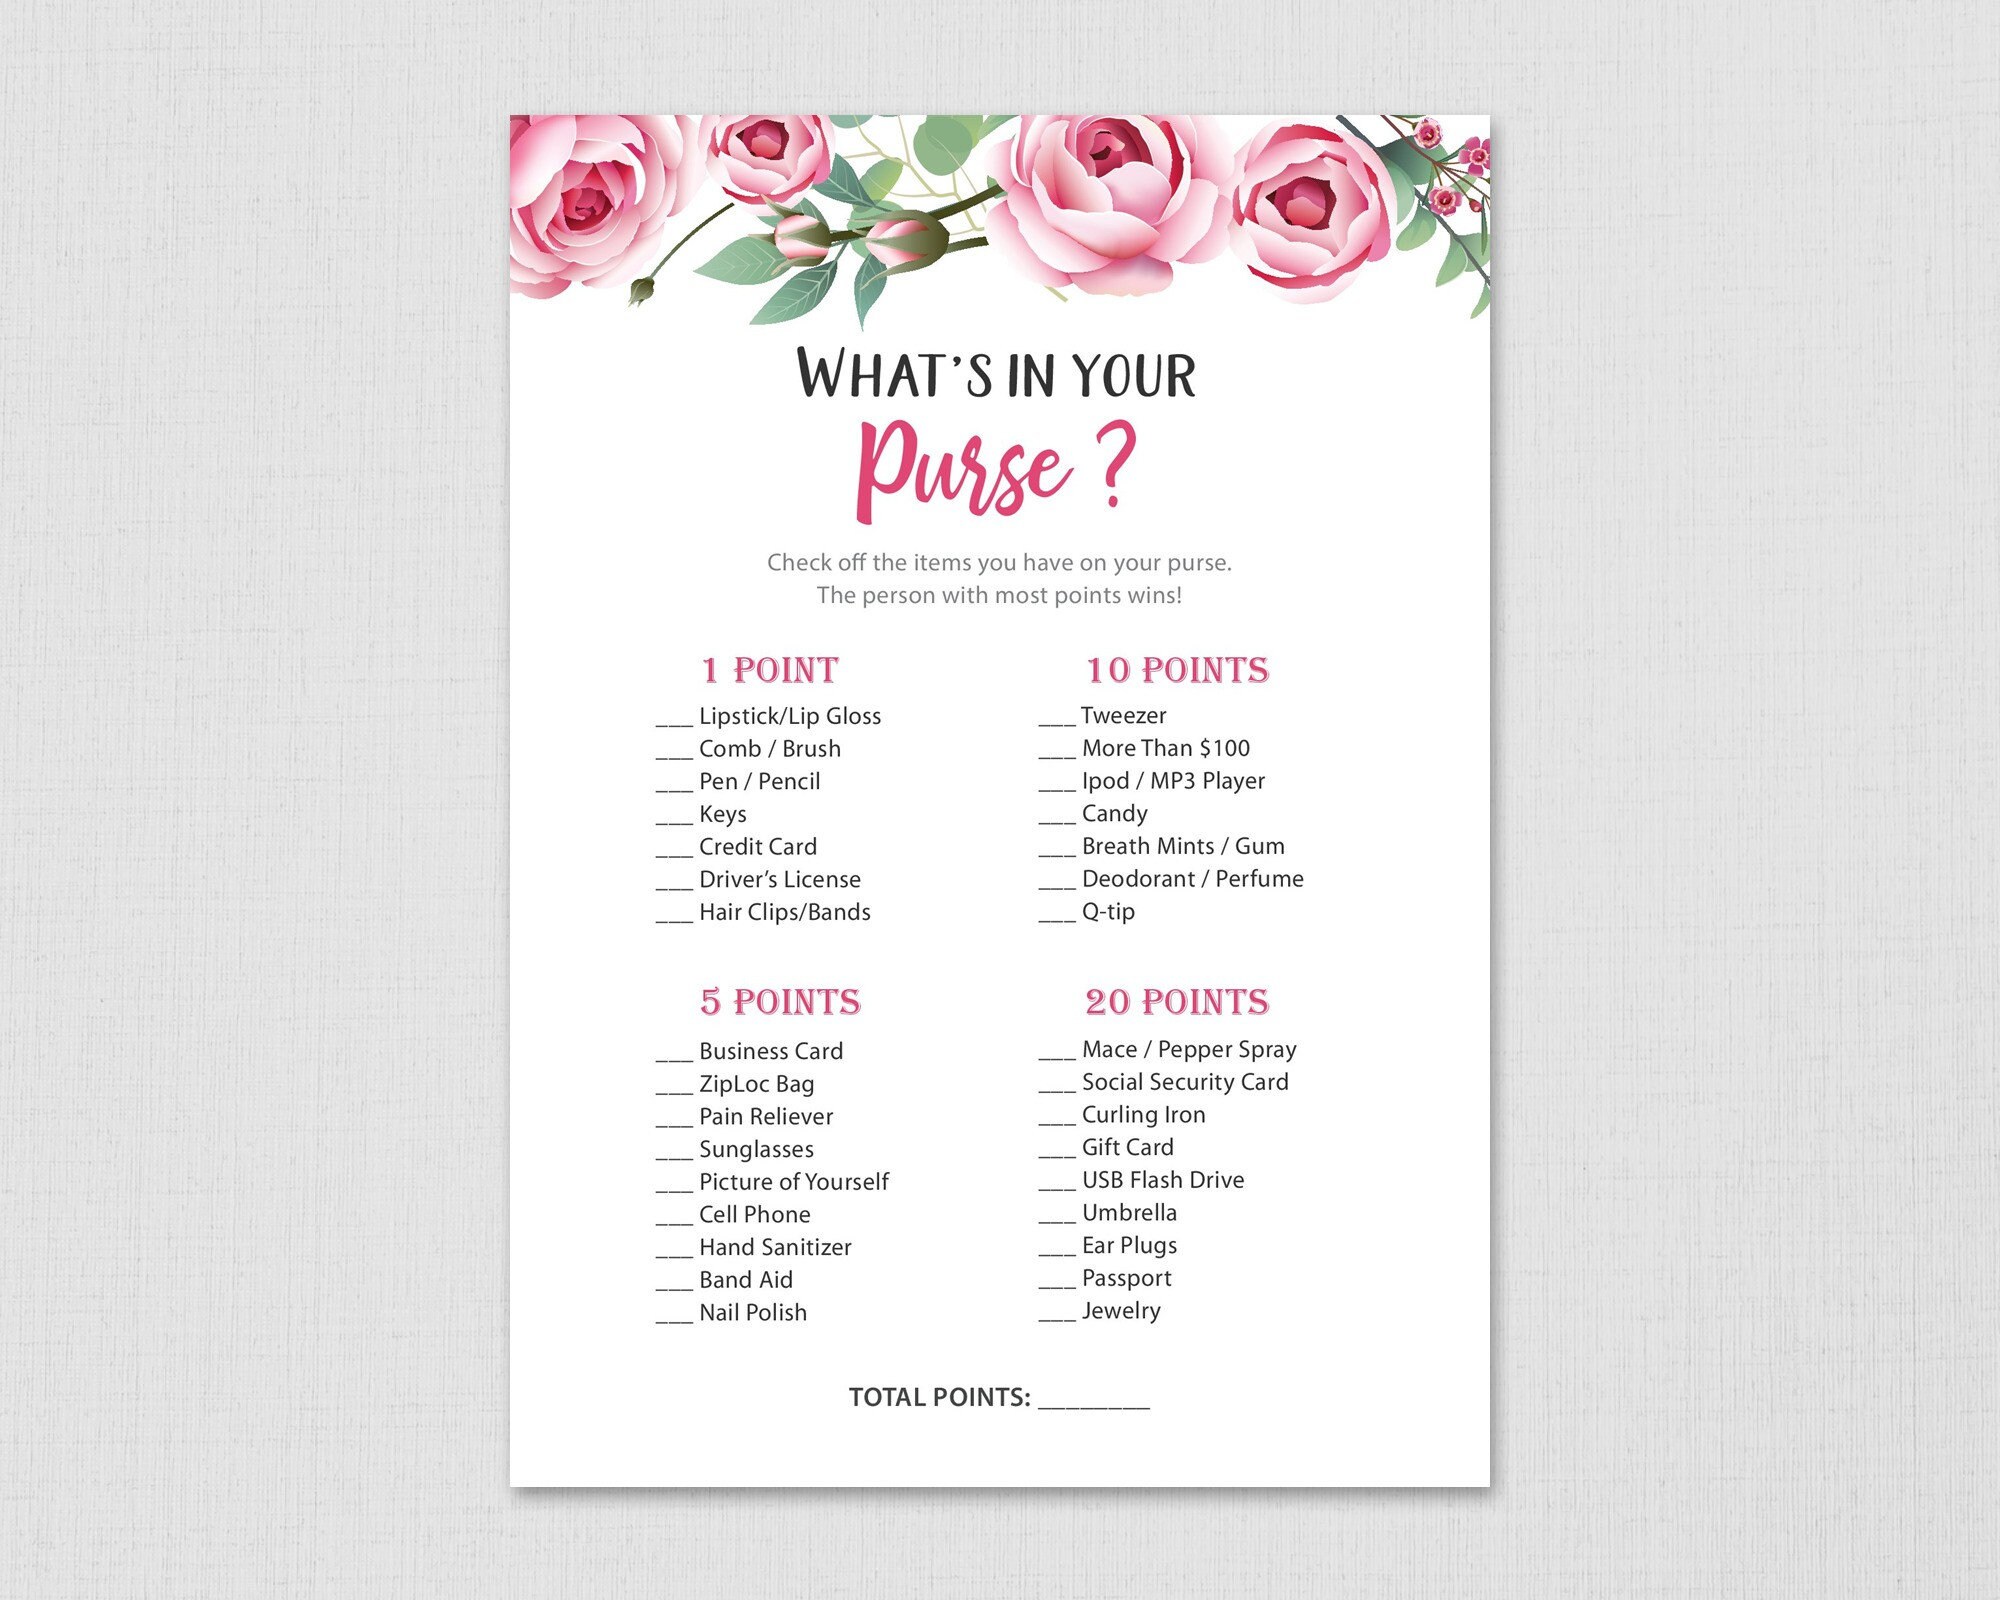 Whats in Your Purse Game Floral Bridal Shower Games